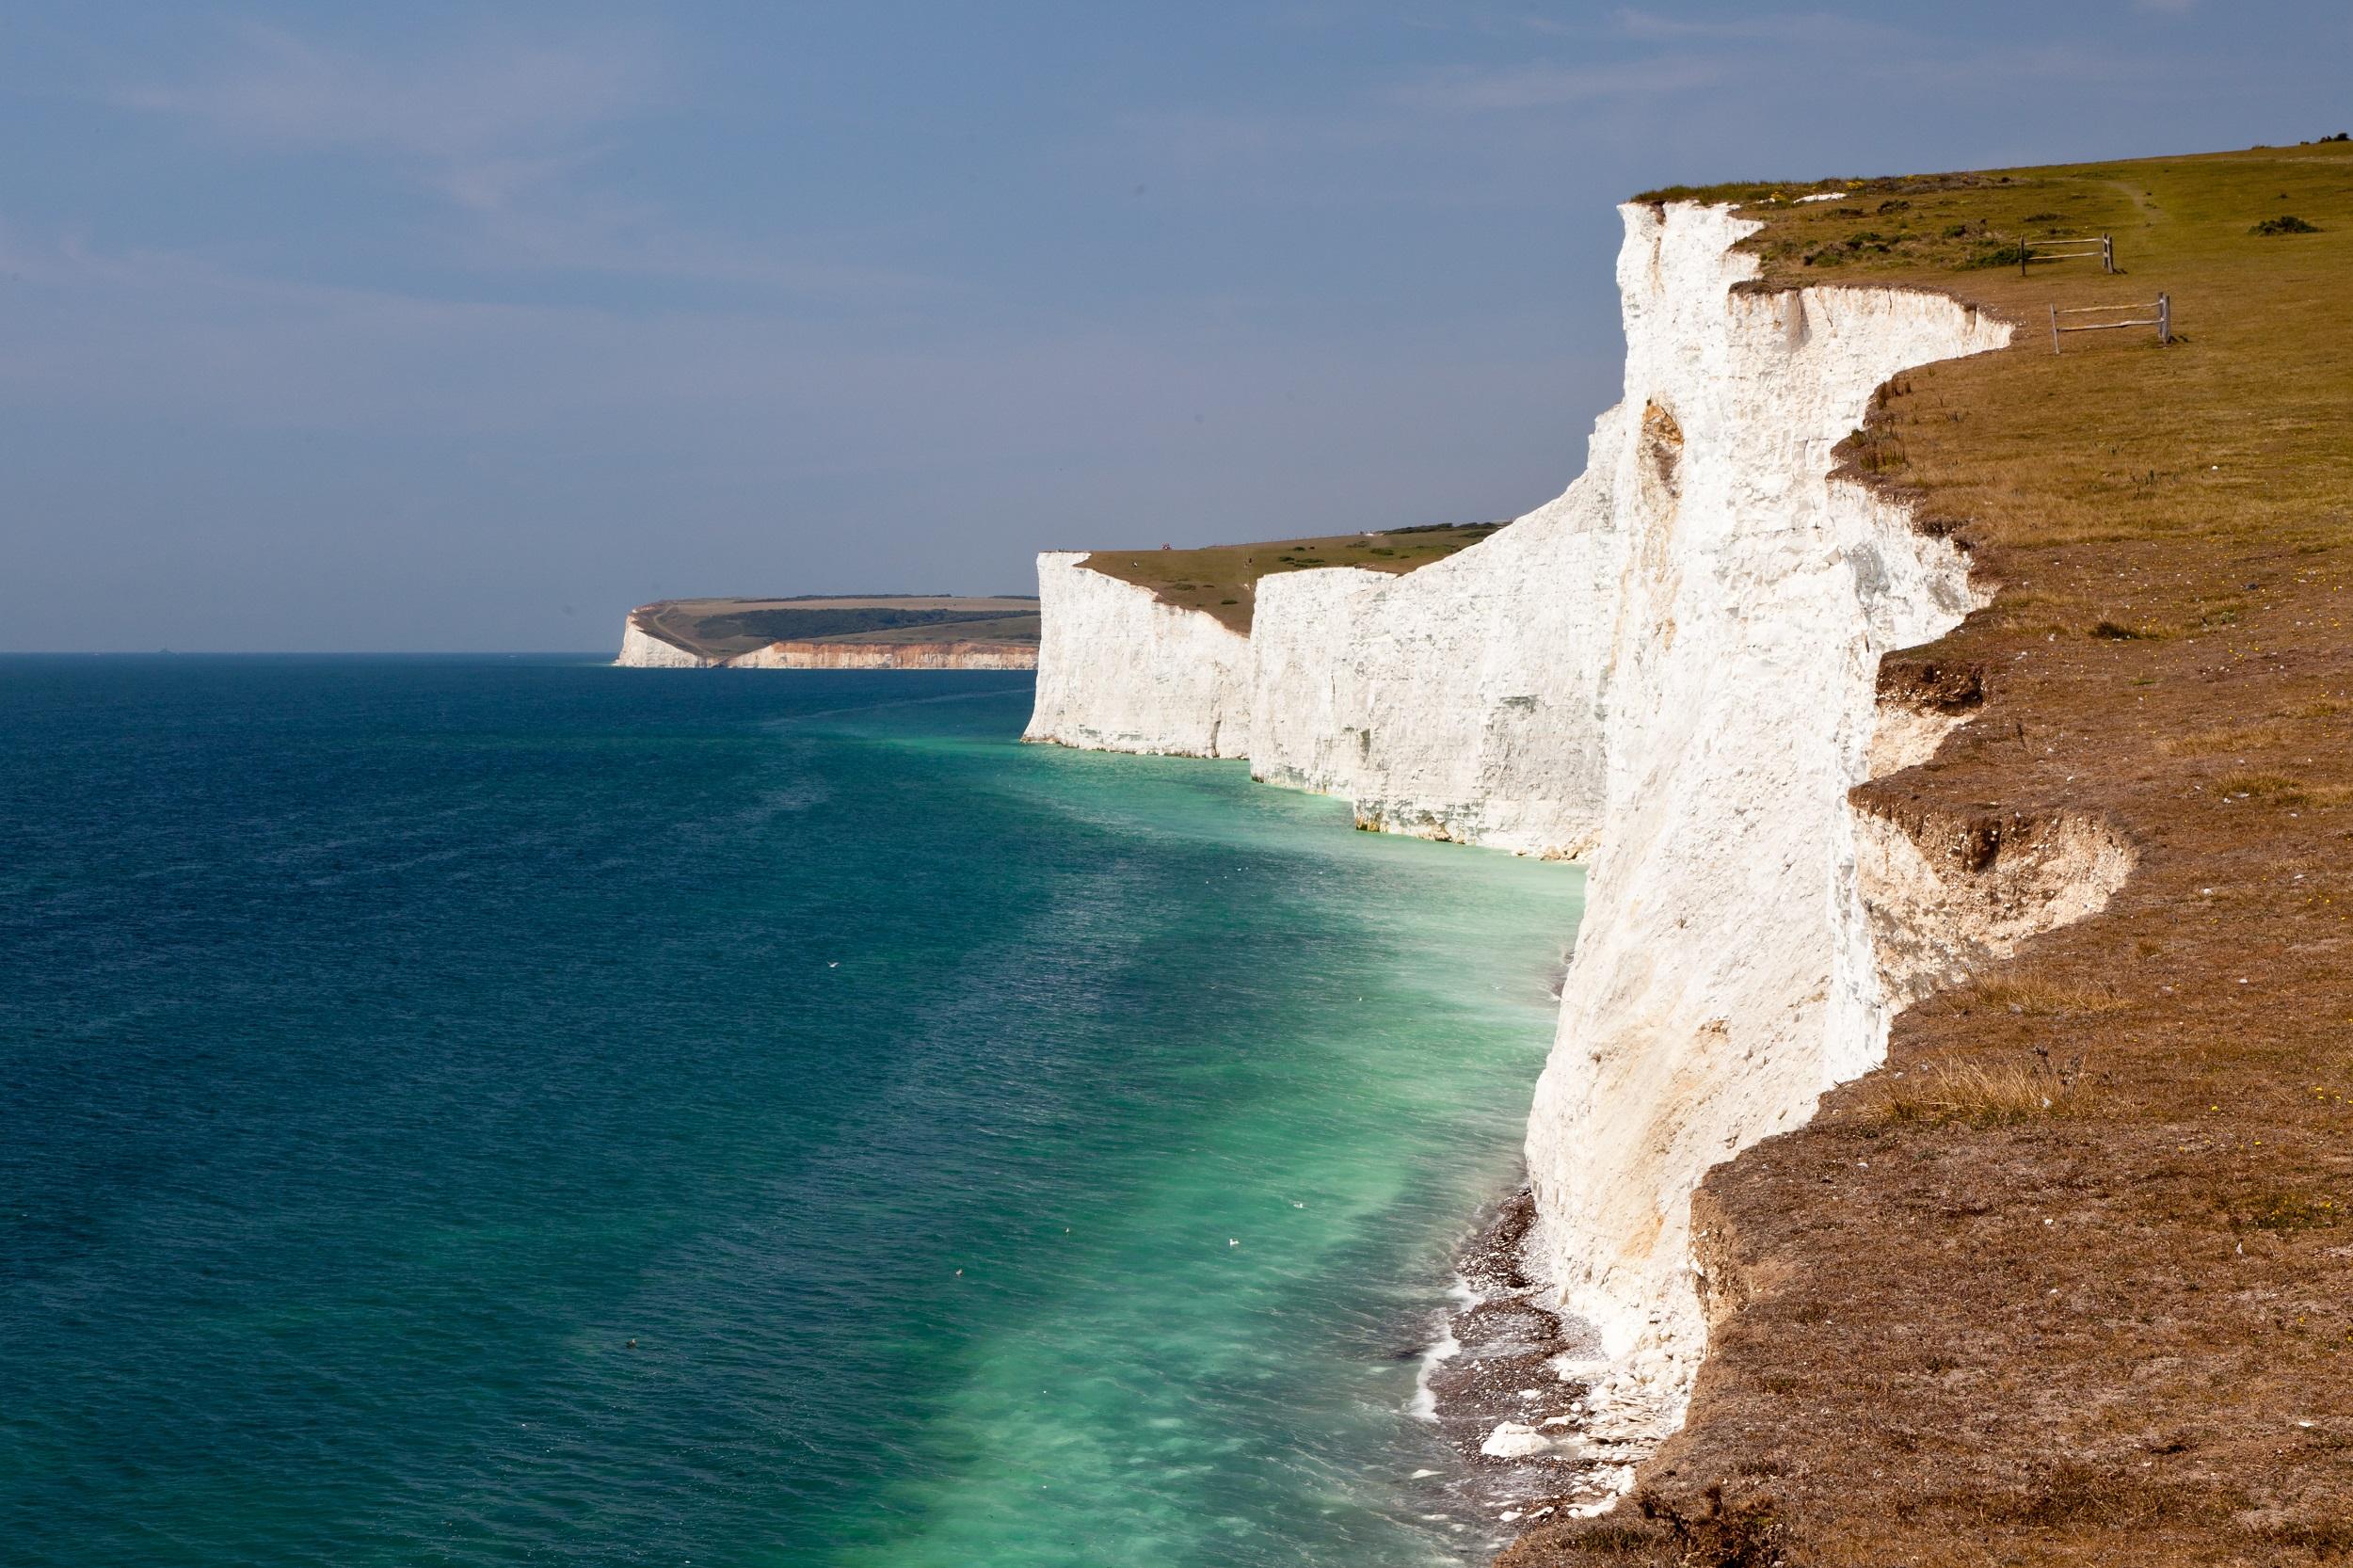 Angleterre Falaises blanches de Douvres